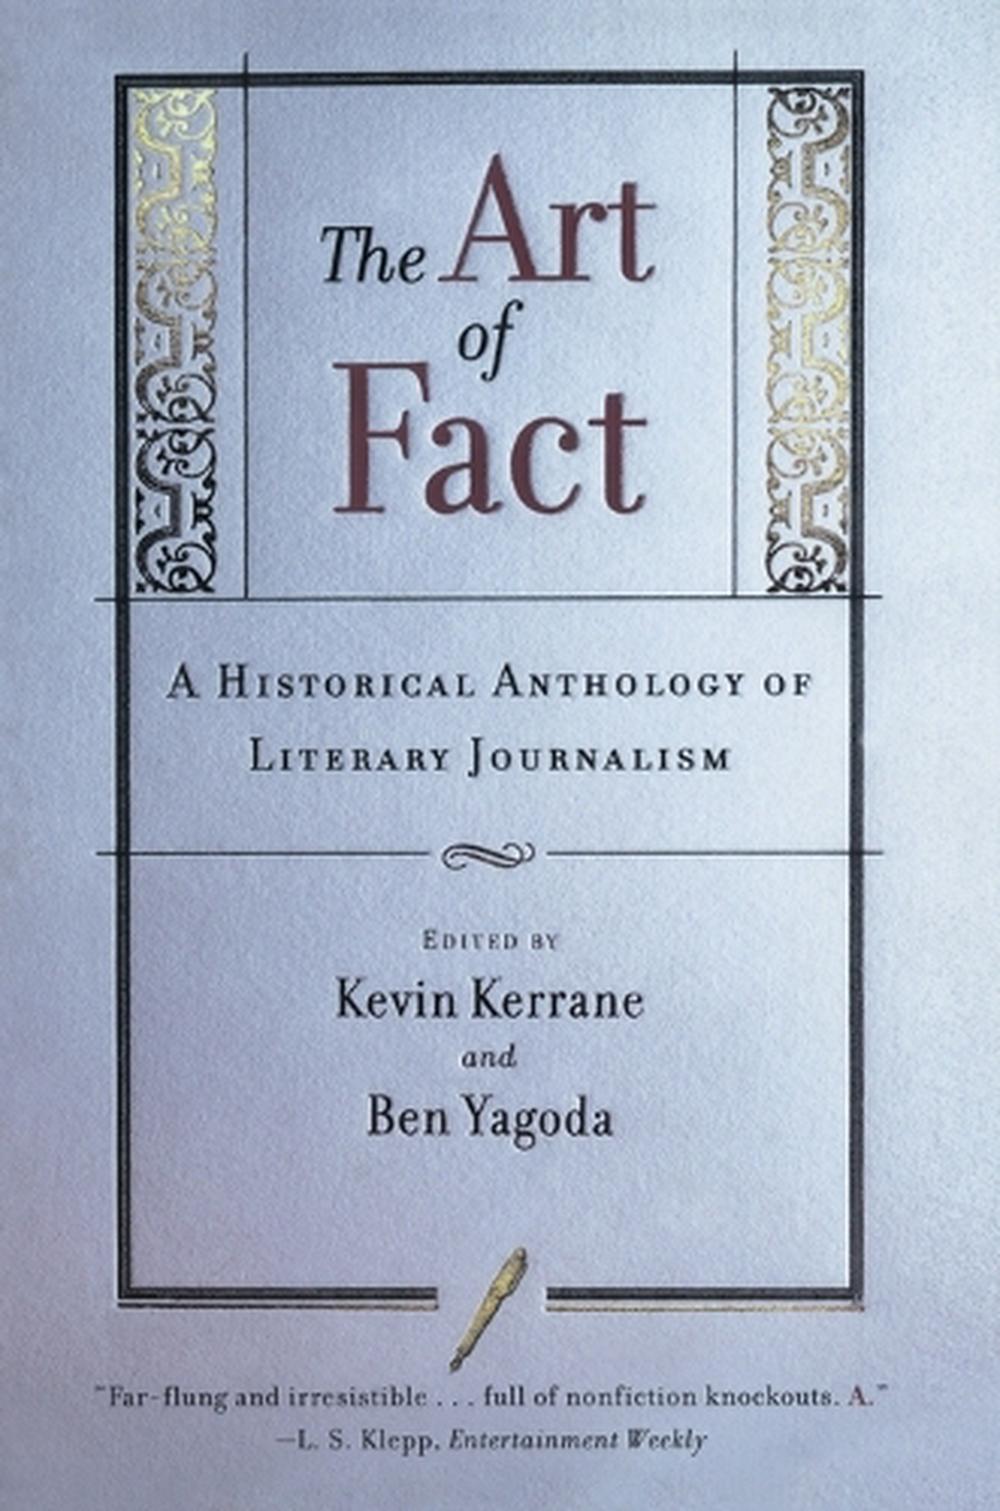 The Art of Fact by Kevin Kerrane